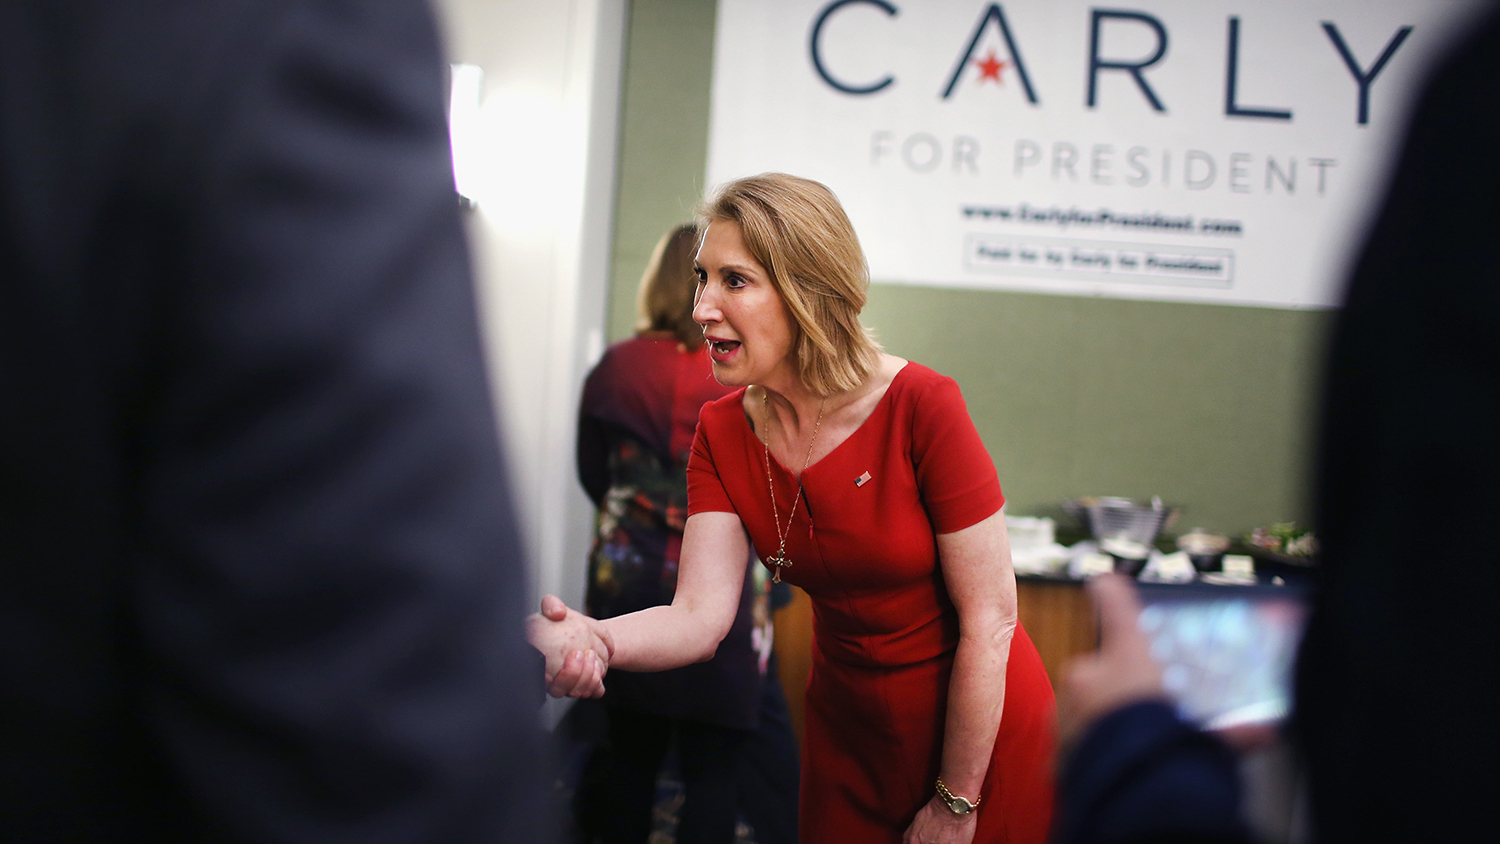 Former business executive Carly Fiorina greets guests at the Republican Party of Iowa's Lincoln Dinner at the Iowa Events Center on May 16, 2015 in Des Moines, Iowa.
